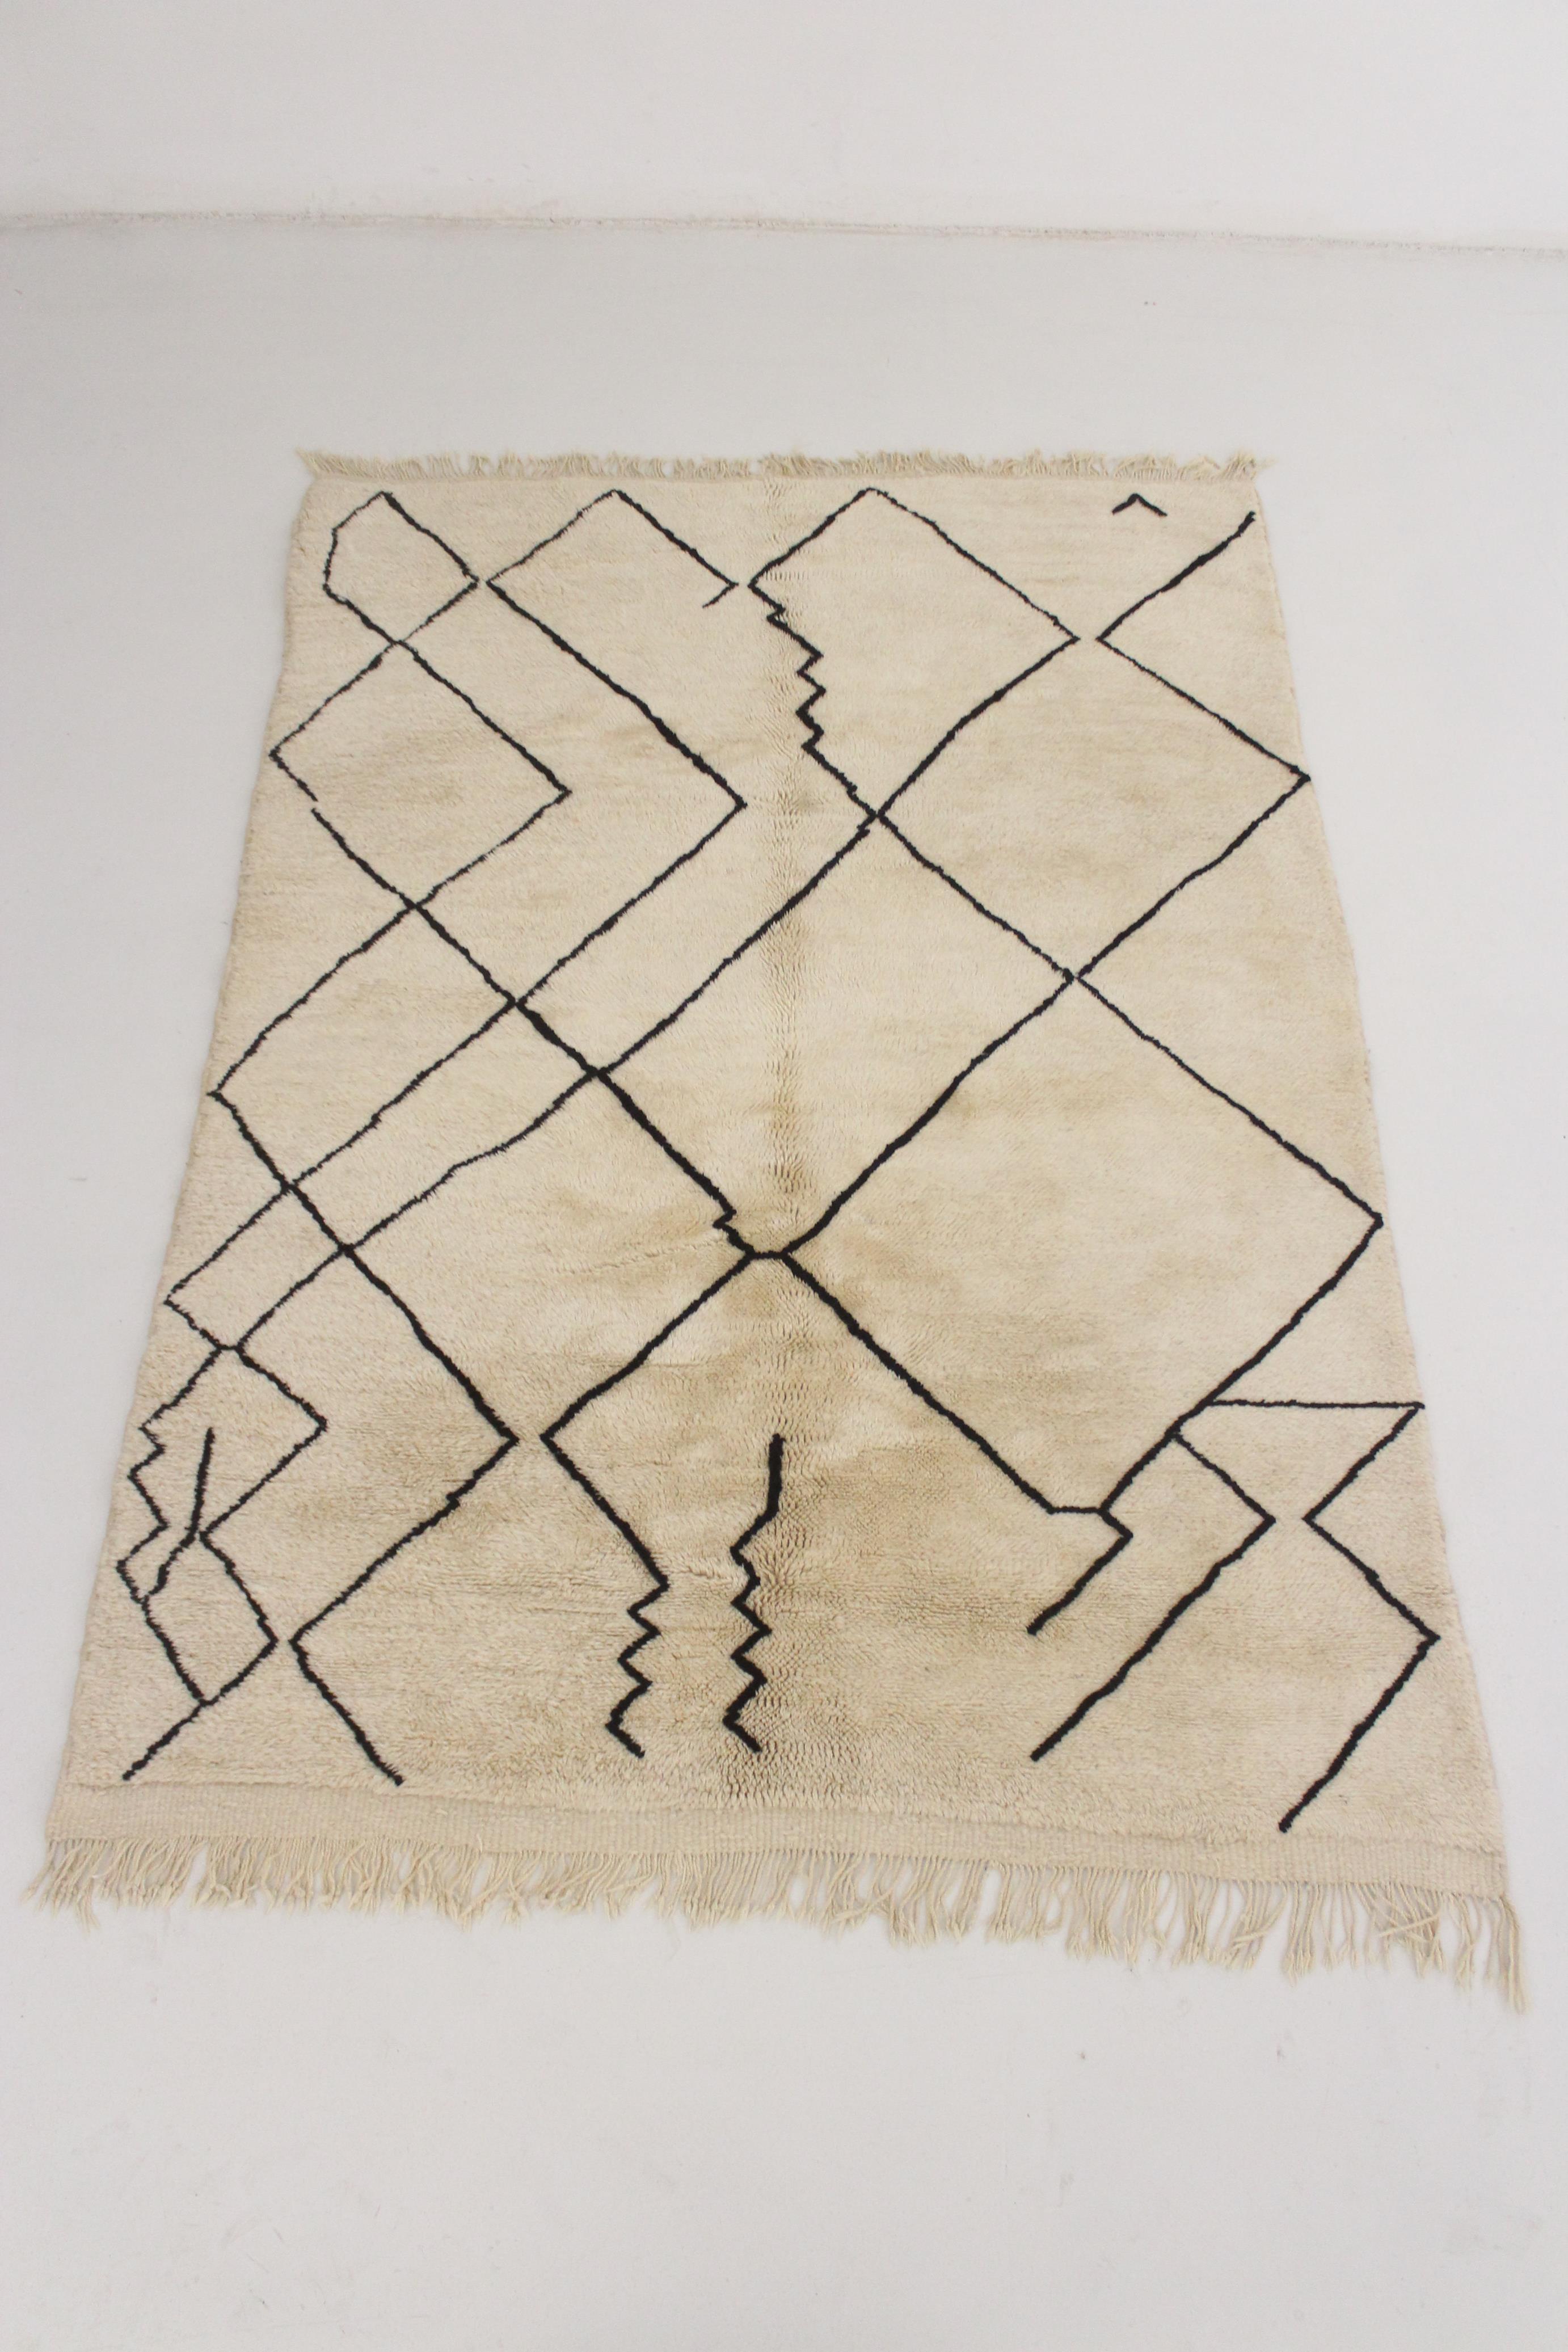 I sourced this modern-style, original Mrirt rug in the area of Khenifra, Atlas Mountains, Morocco. Groups of women there still weave by hand on traditional, vertical looms to make these new rugs!

The background of the rug is a beige with thick,